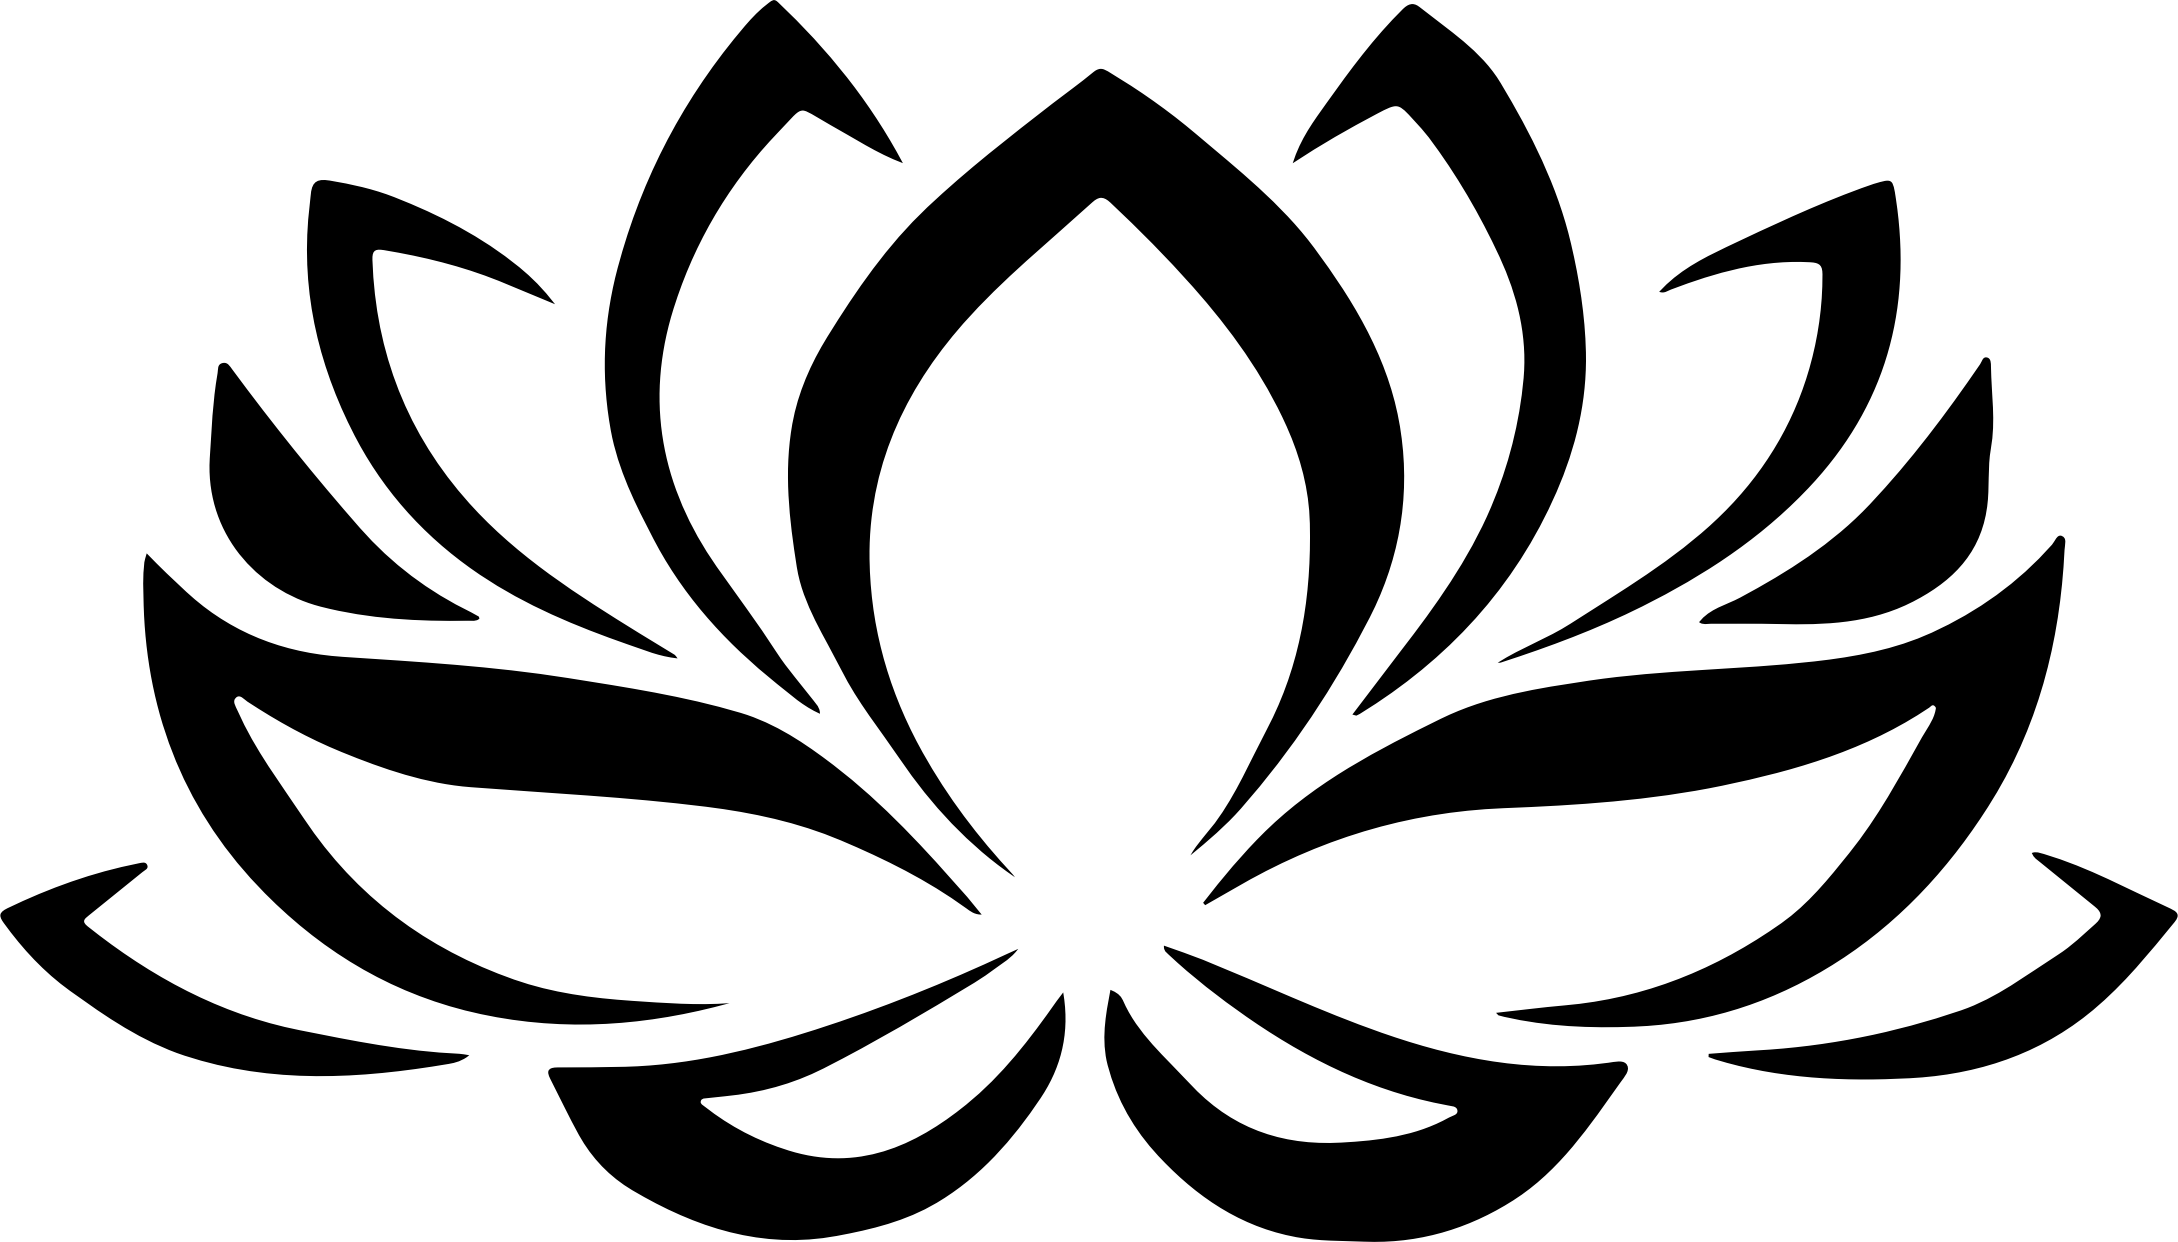 Black and White Lotus Logo - Lotus flower images graphic - RR collections